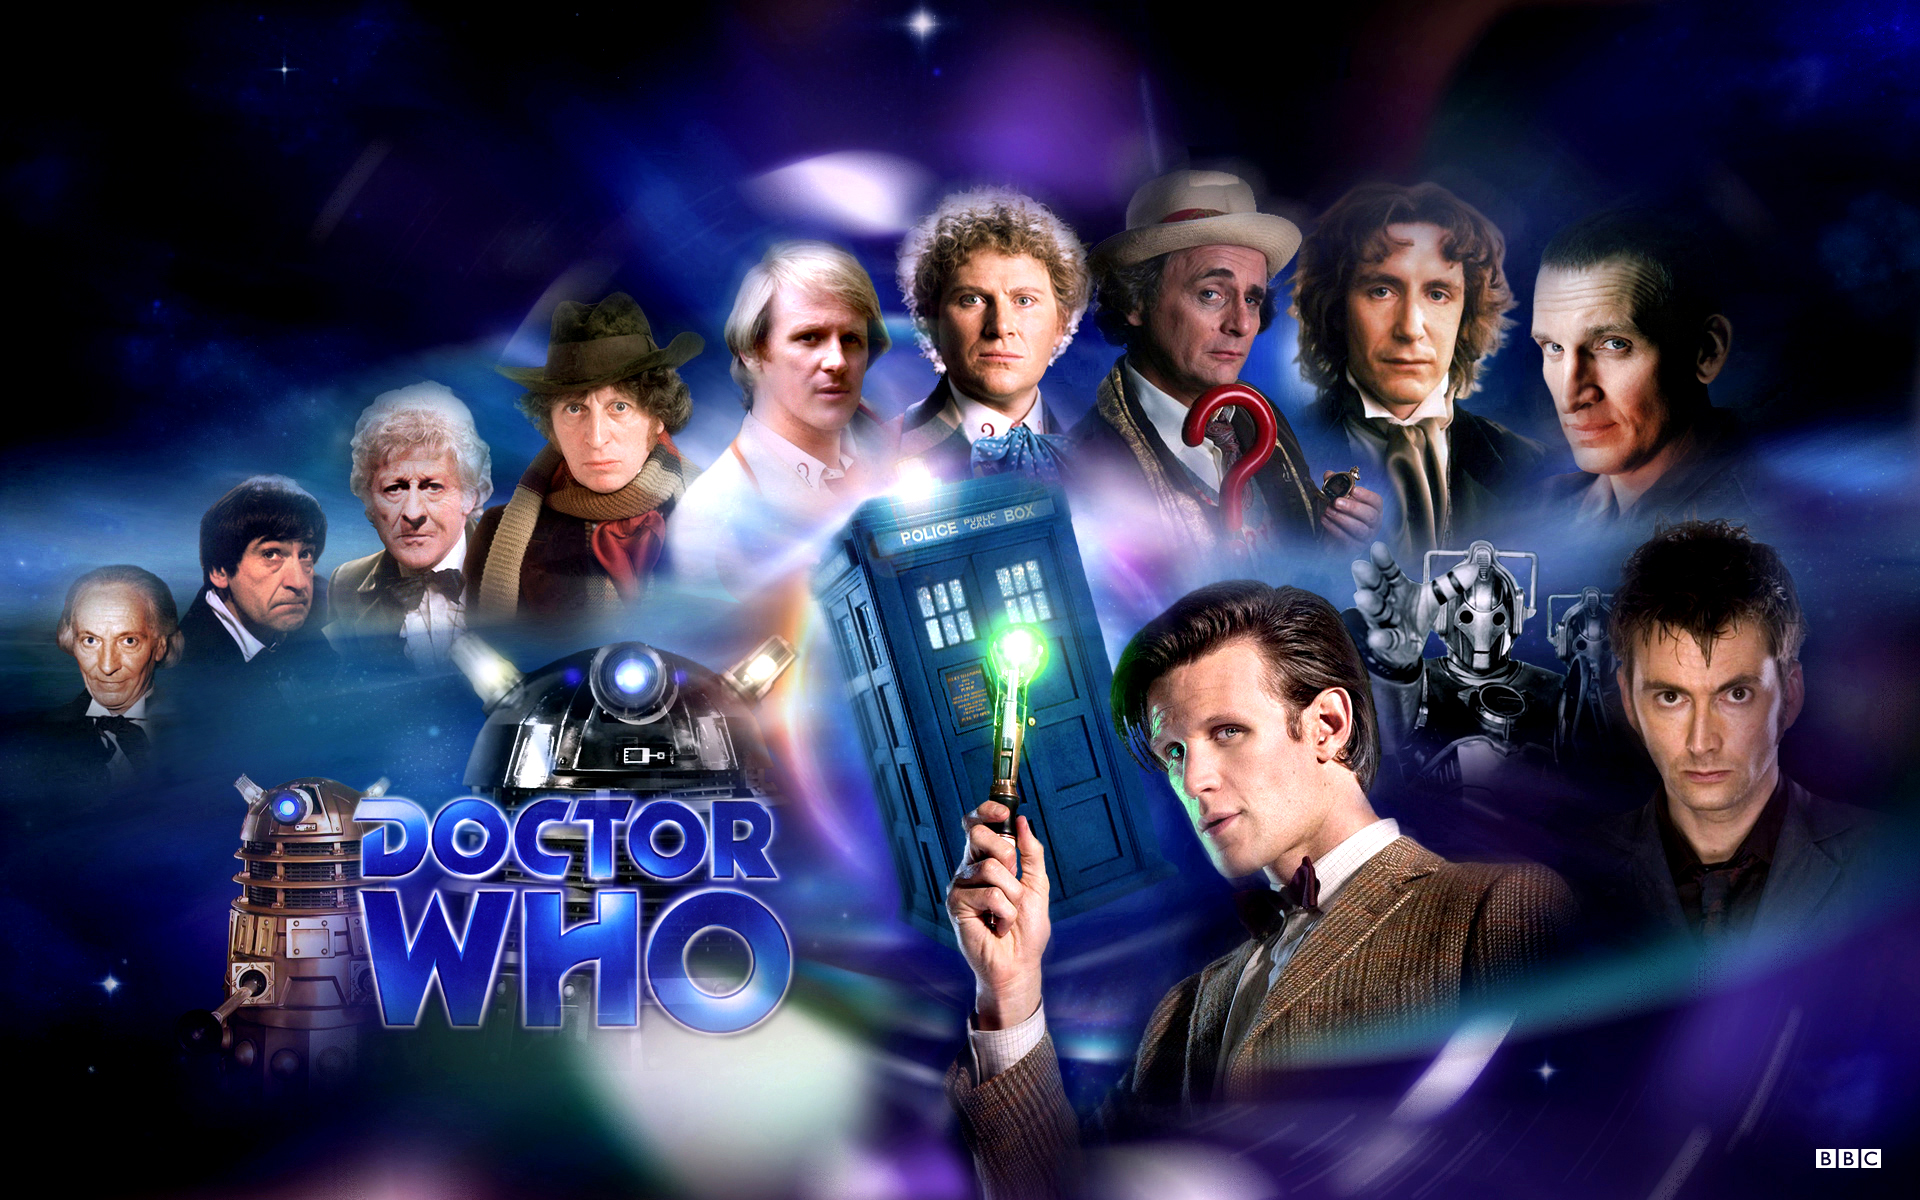 doctor_who___all_doctors_by_1darthvader-d5qrmbn.jpg